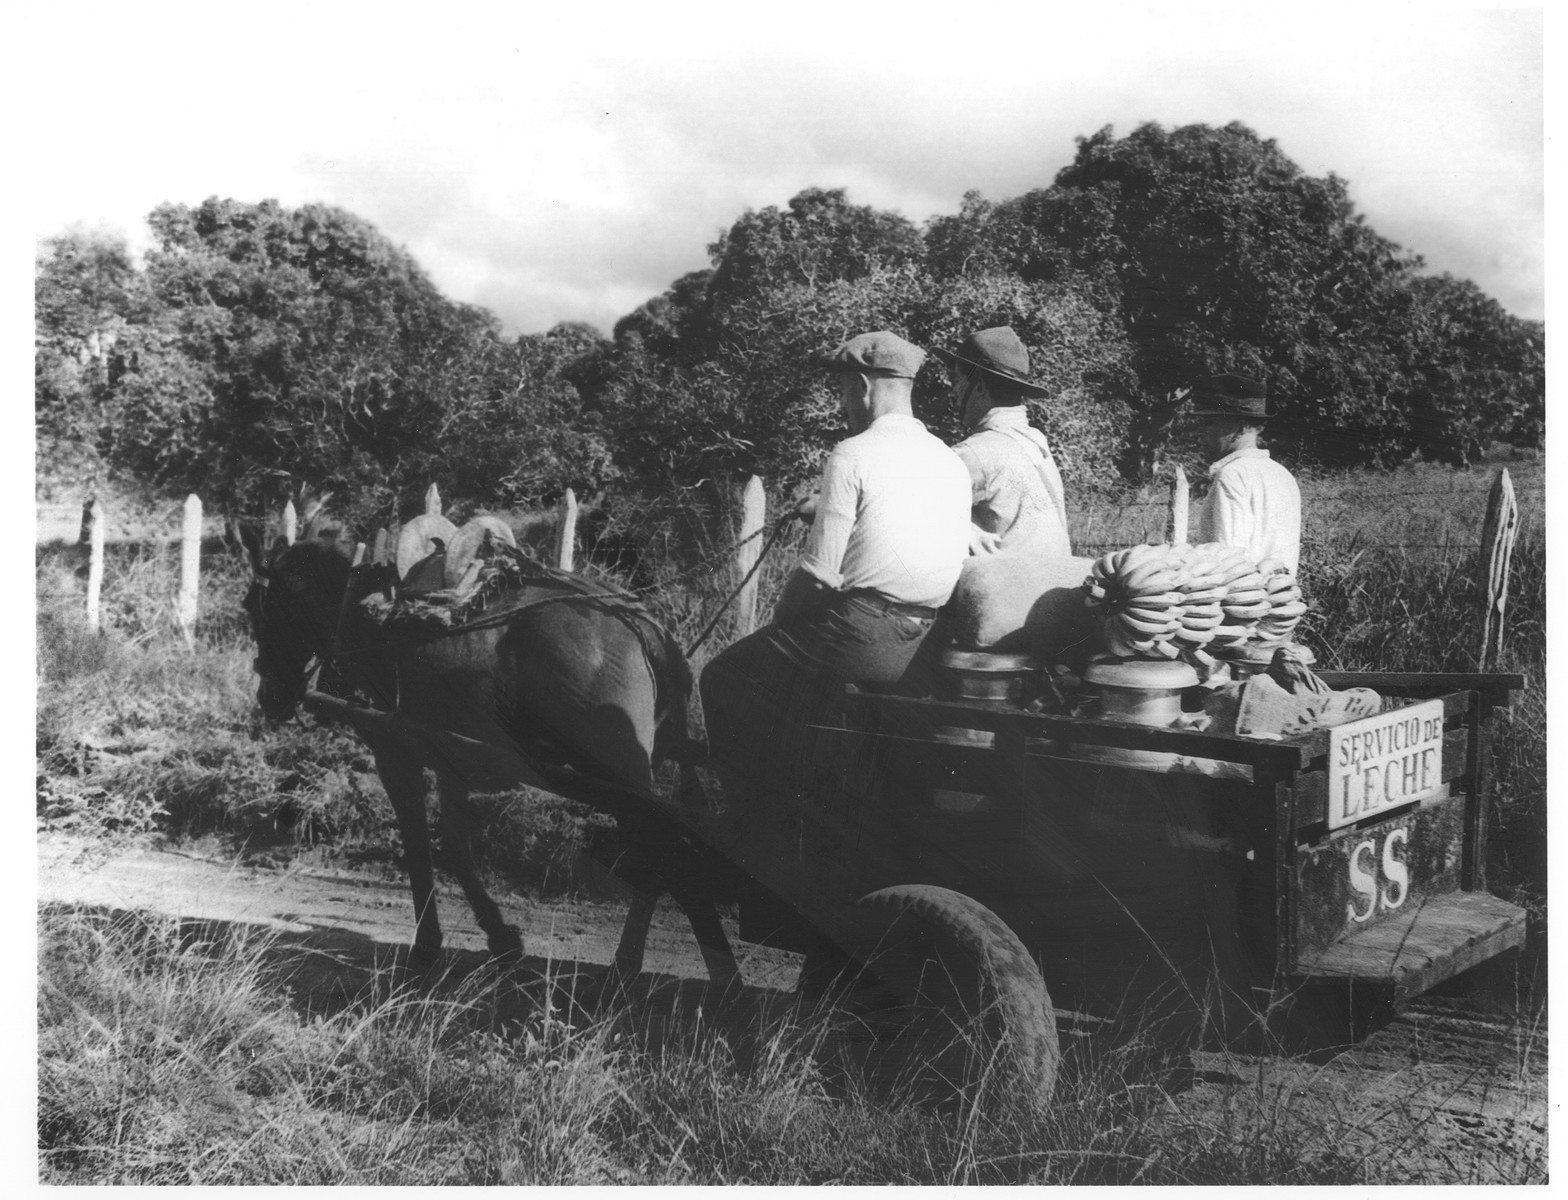 Jewish refugees living in the Sosua refugee colony deliver milk and bananas in a horse-drawn wagon.

Seated in the center is Freddy Adler.